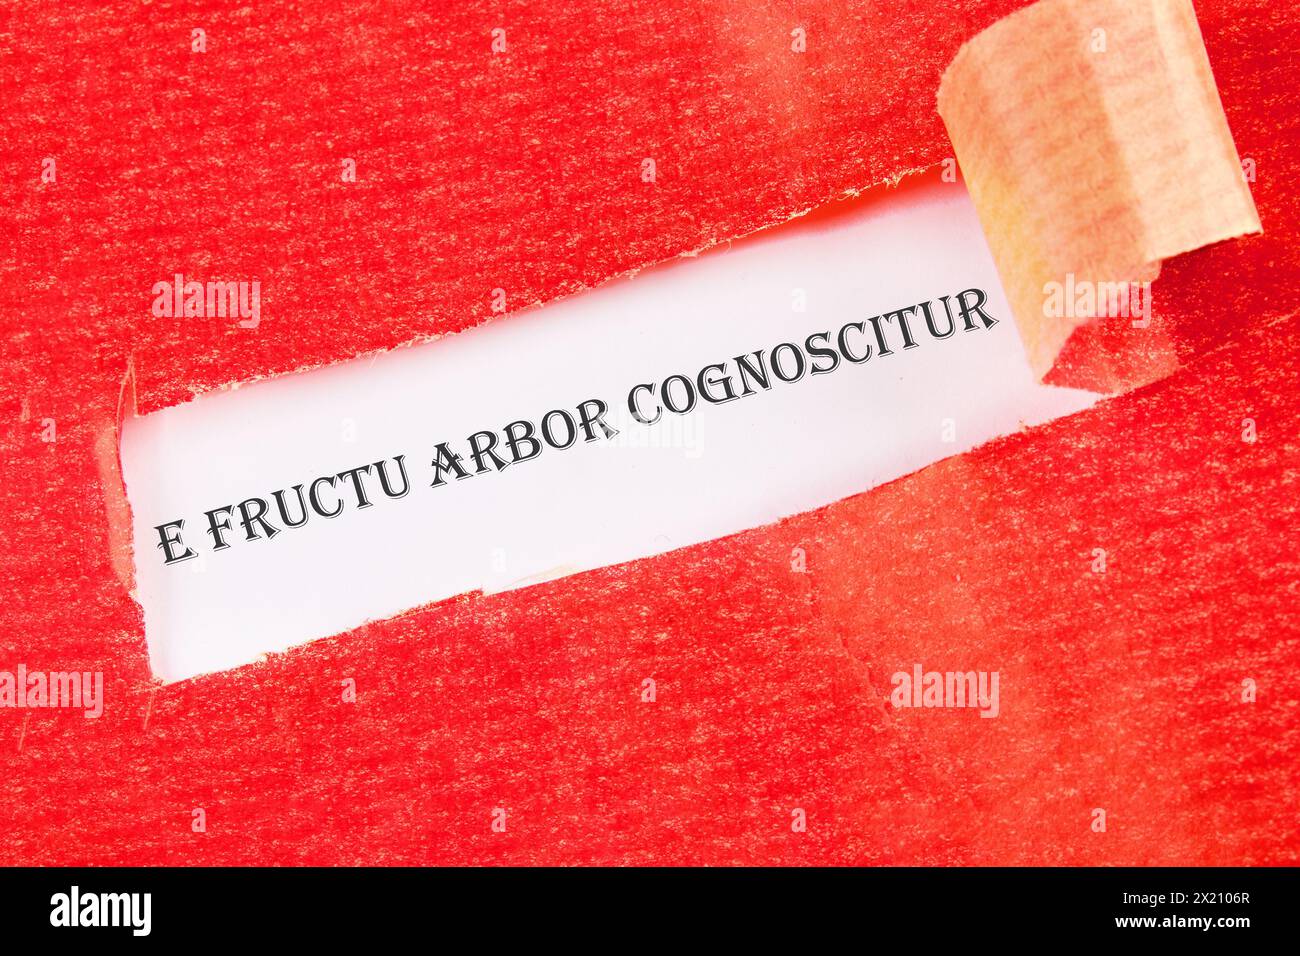 E fructu arbor cognoscitur the phrase in Latin translates as the Tree is known by its fruits on a white background under torn paper Stock Photo